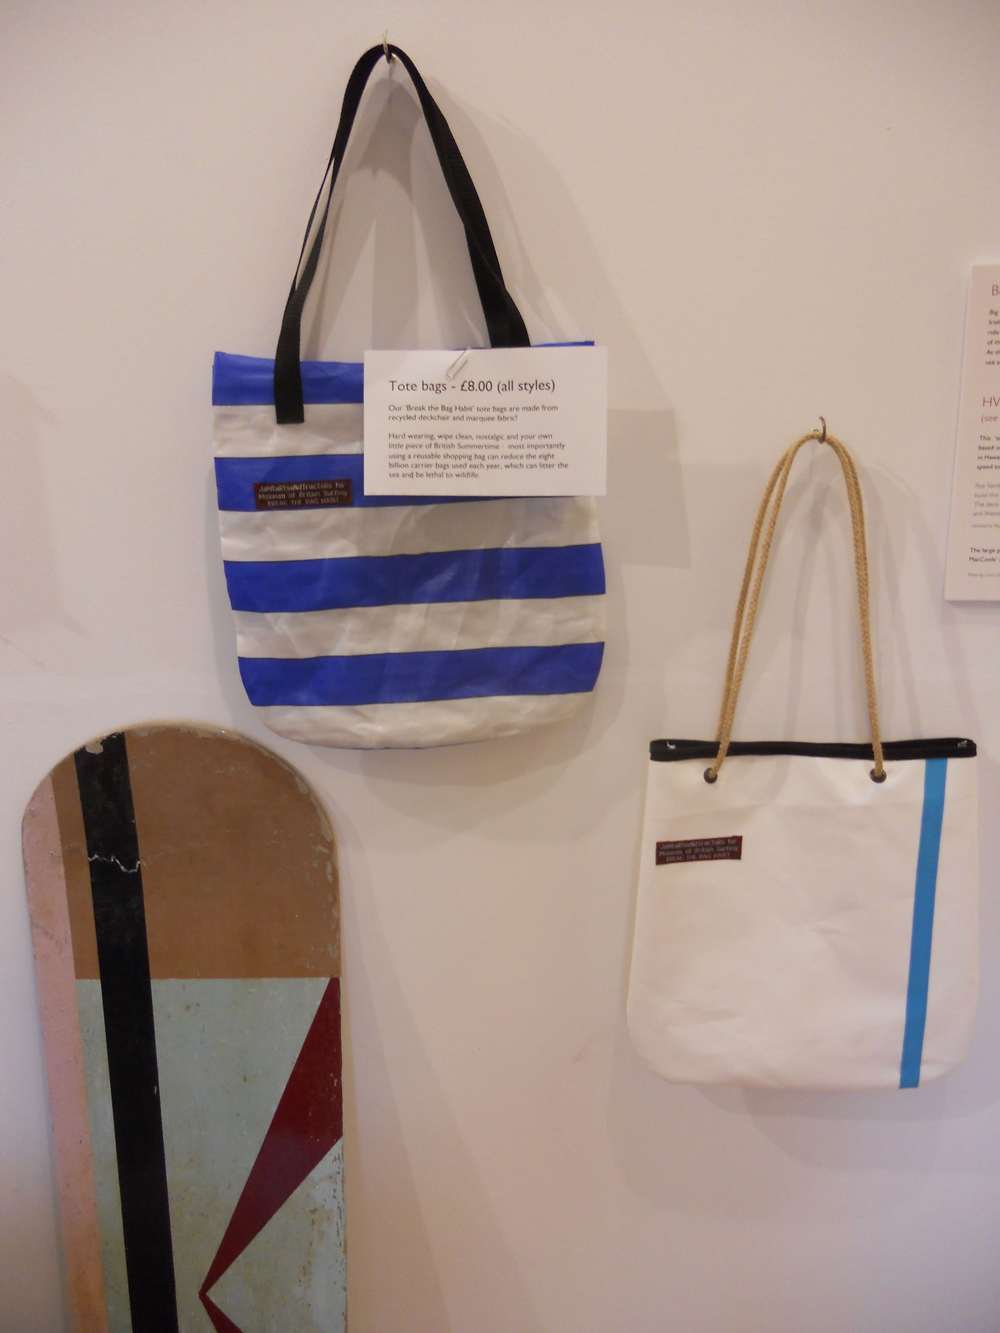 Recycled deckchair tote bags now on sale